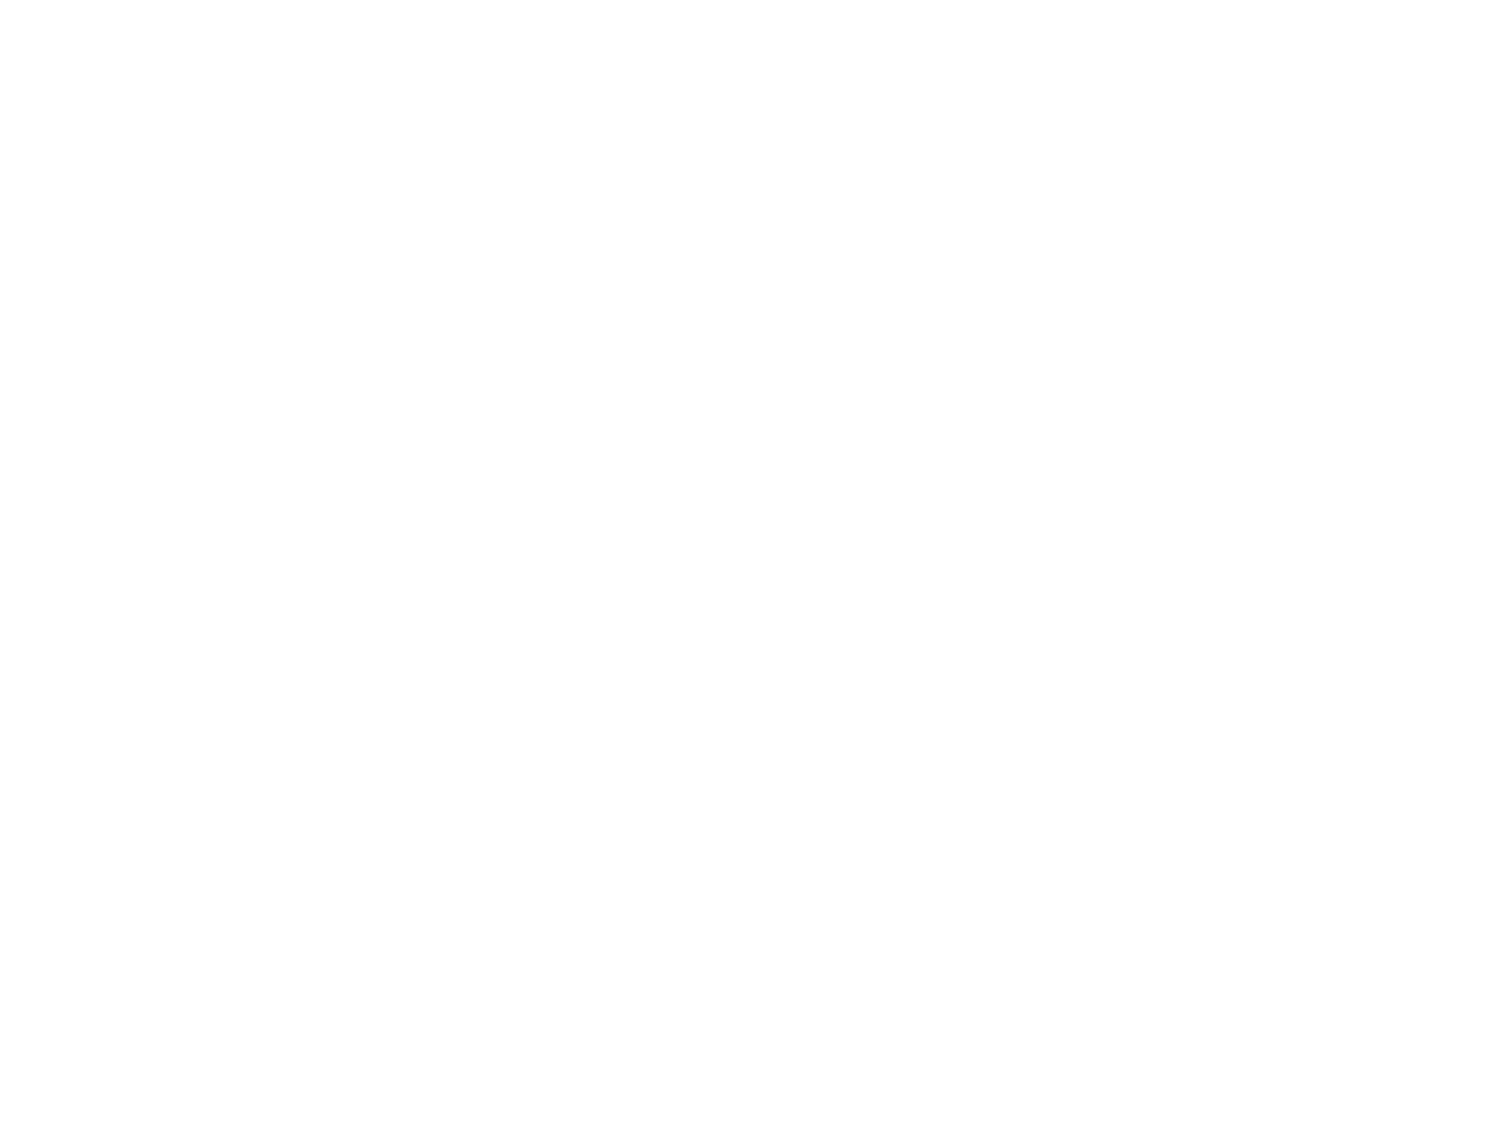 Jaszi Butler PLLC - A boutique law firm expert in fair use.